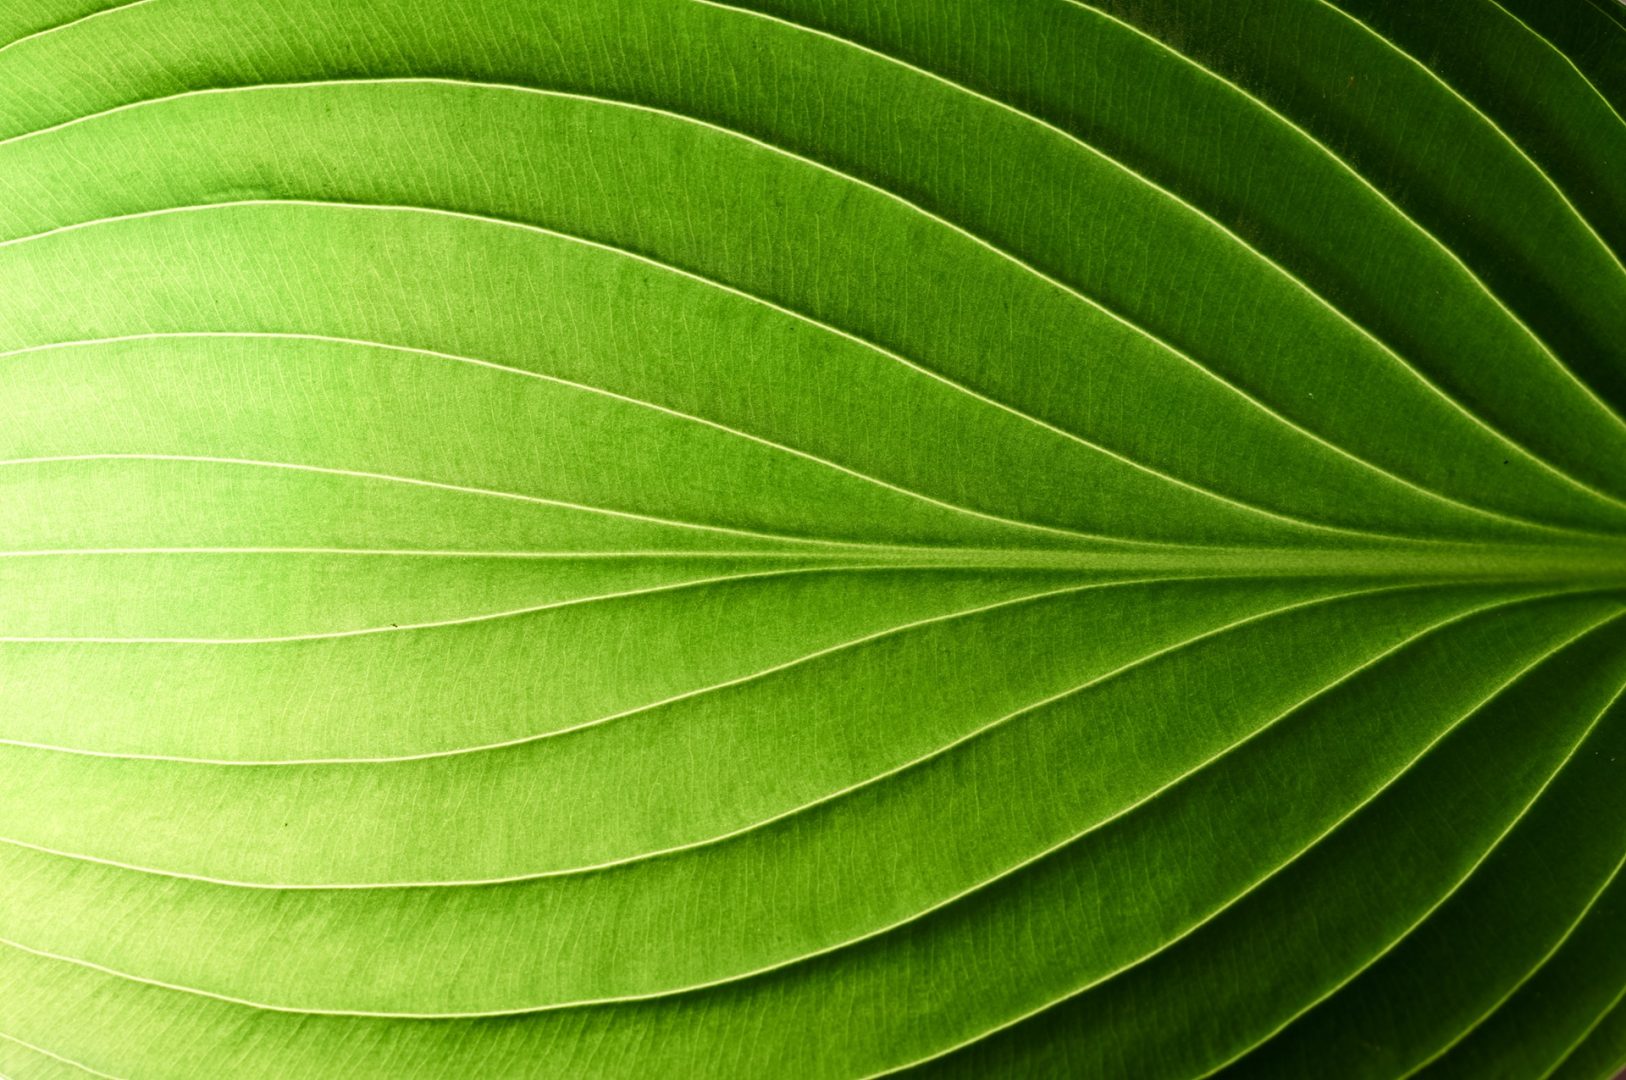 Close-up of a green leaf showing detailed texture and parallel vein patterns.